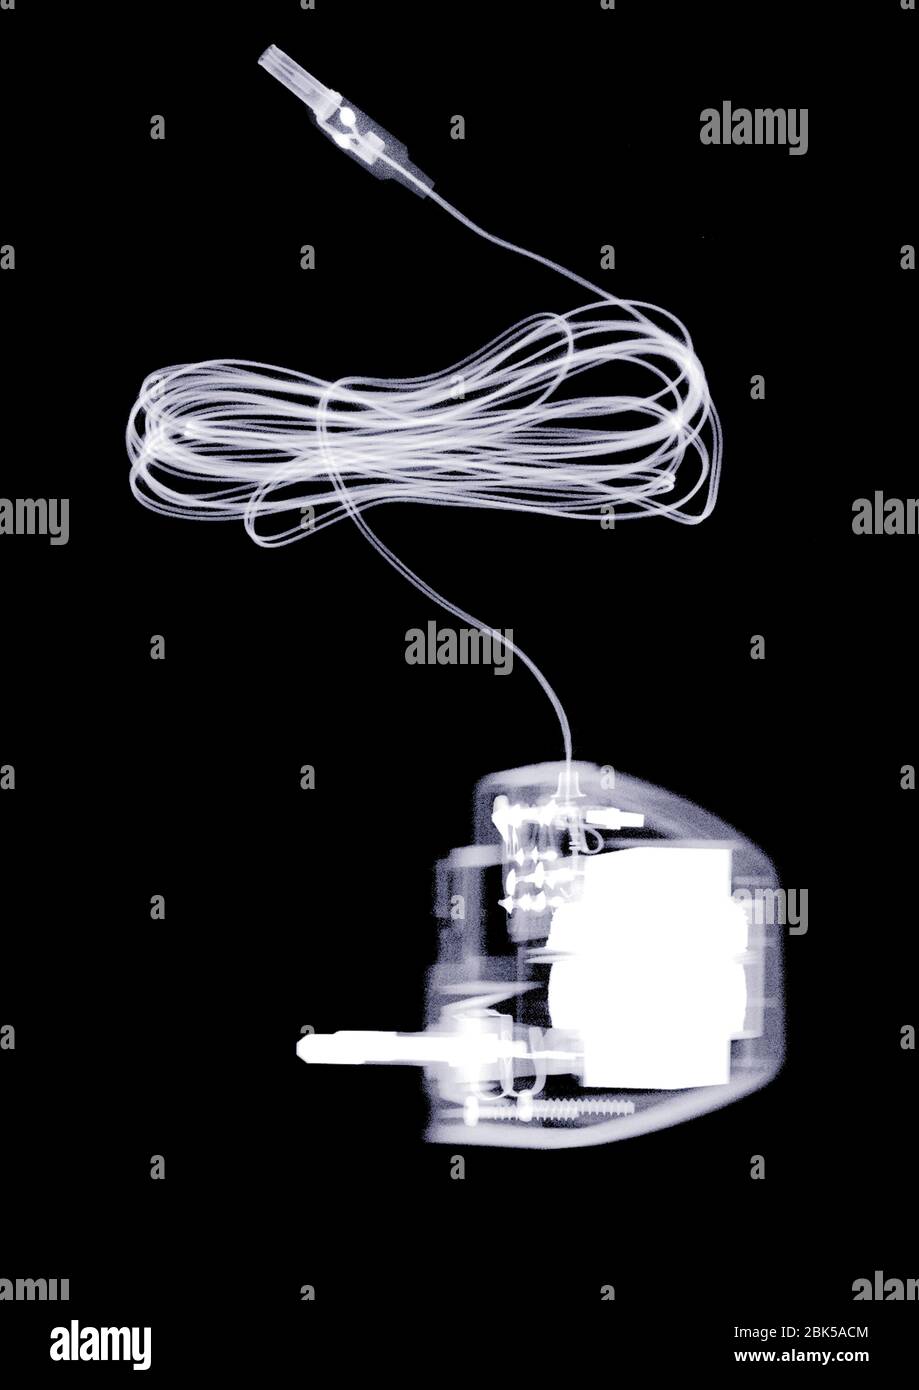 Electrical charger or adaptor, X-ray. Stock Photo